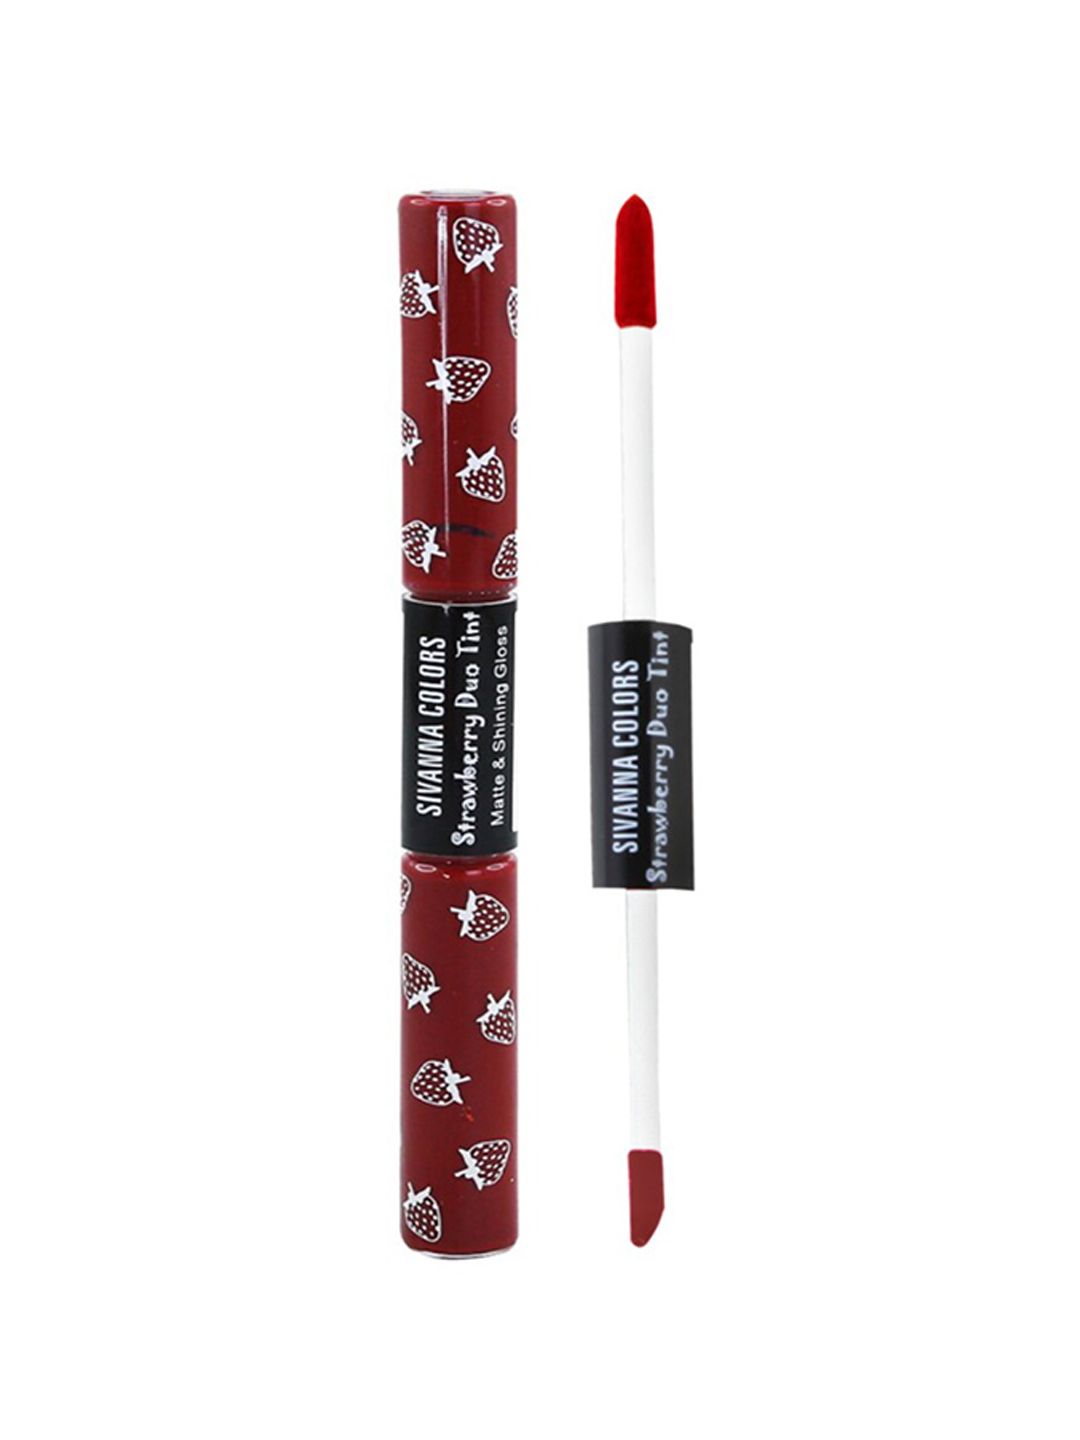 Sivanna Colors 2 in 1 Strawberry Duo Tint Matte & Shining Lip Gloss - DK035 10 Price in India